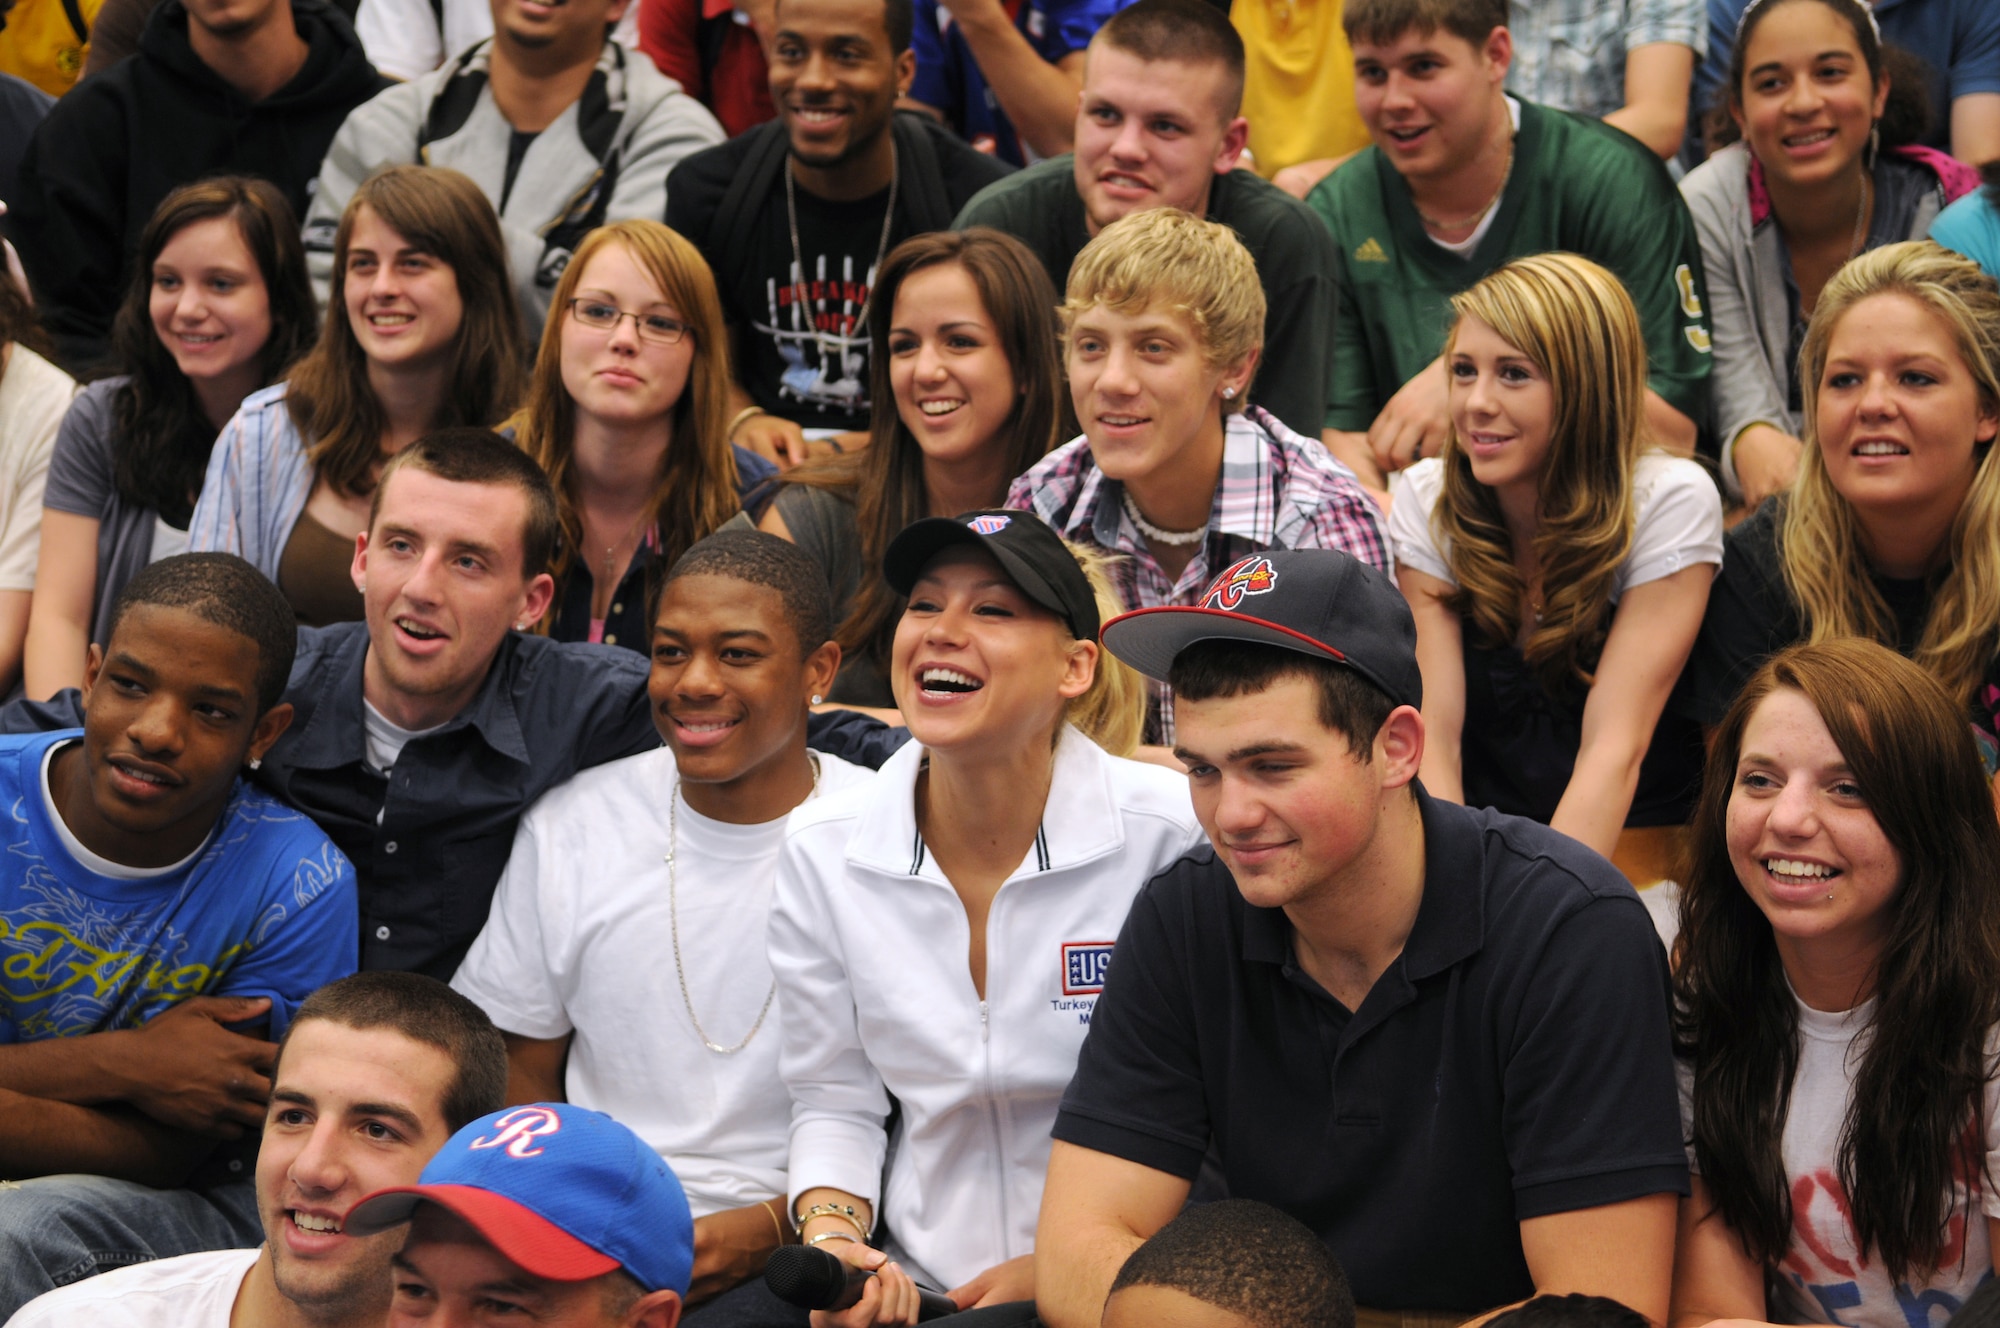 Anna Kournikova (center), former professional tennis player, poses with students at Ramstein High School, Ramstein Air Base, Germany, May 19, 2009, after talking to them about school, her tennis career and working hard.  Kournikova visits with students as part of a six-day educational United Service Organizations tour. (U.S. Air Force photo by Airman 1st Class Grovert Fuentes-Contreras)